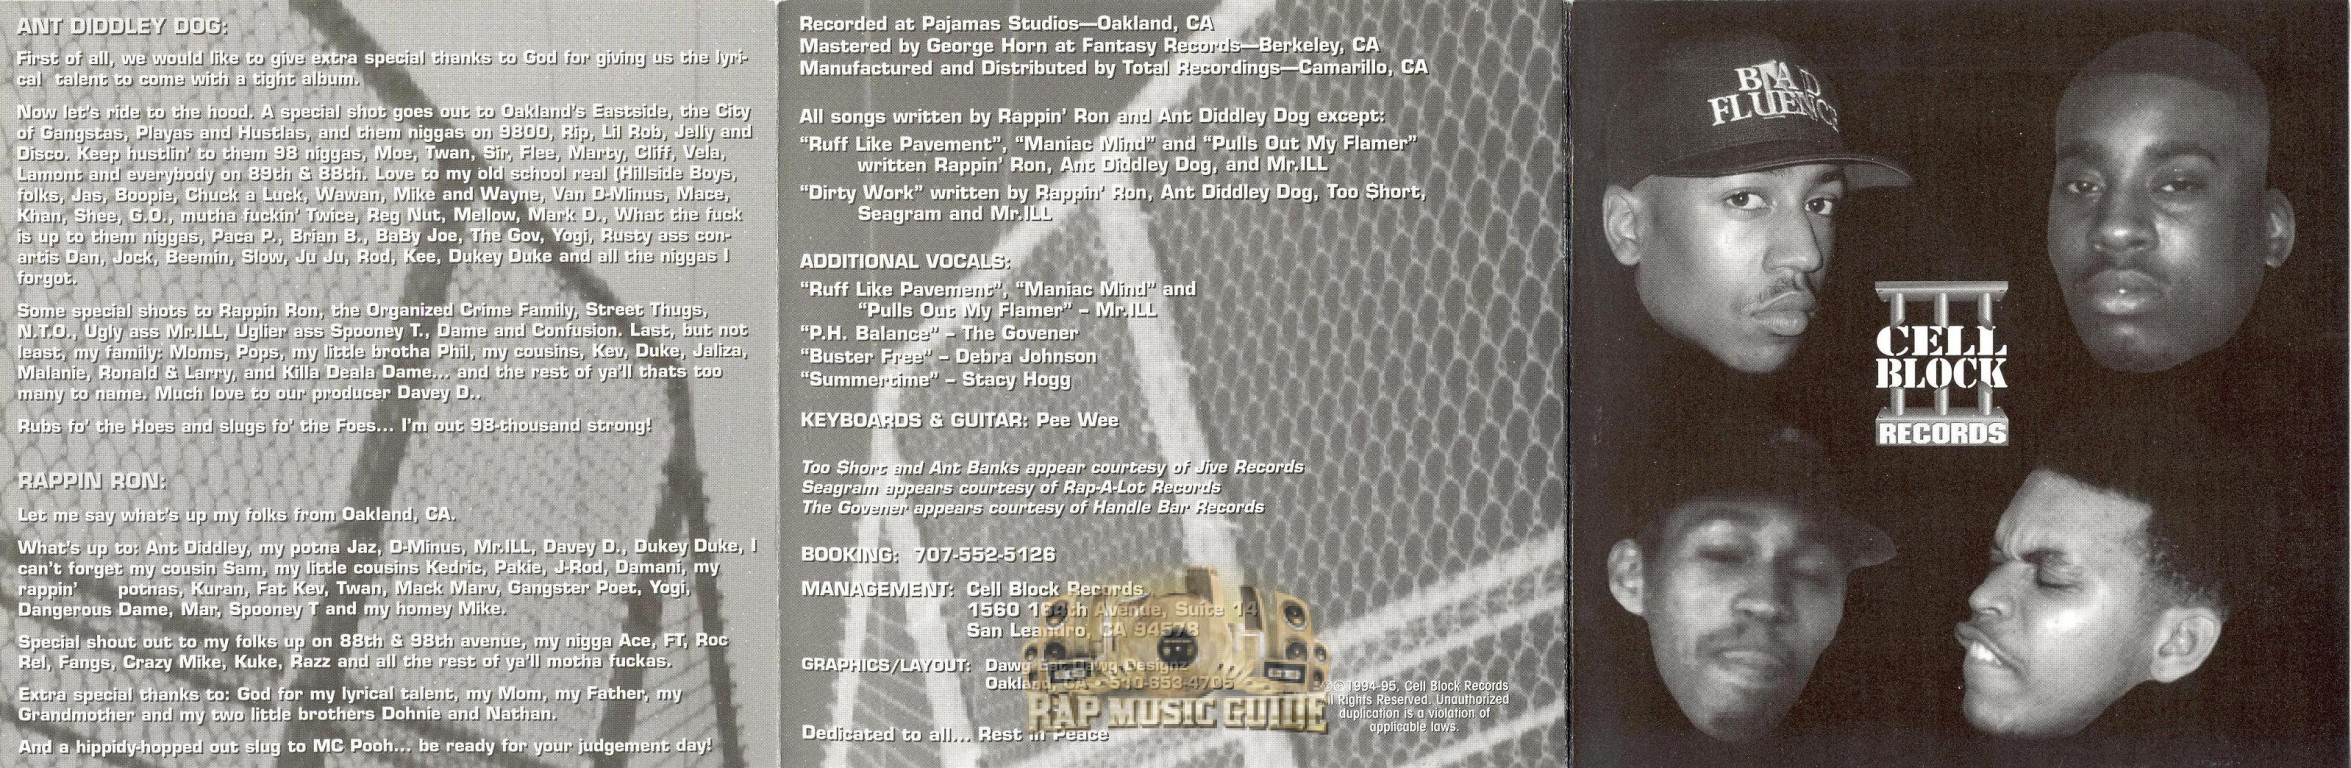 Rappin' Ron & Ant Diddley Dog - Bad N-Fluenz: Re-Release. CD | Rap